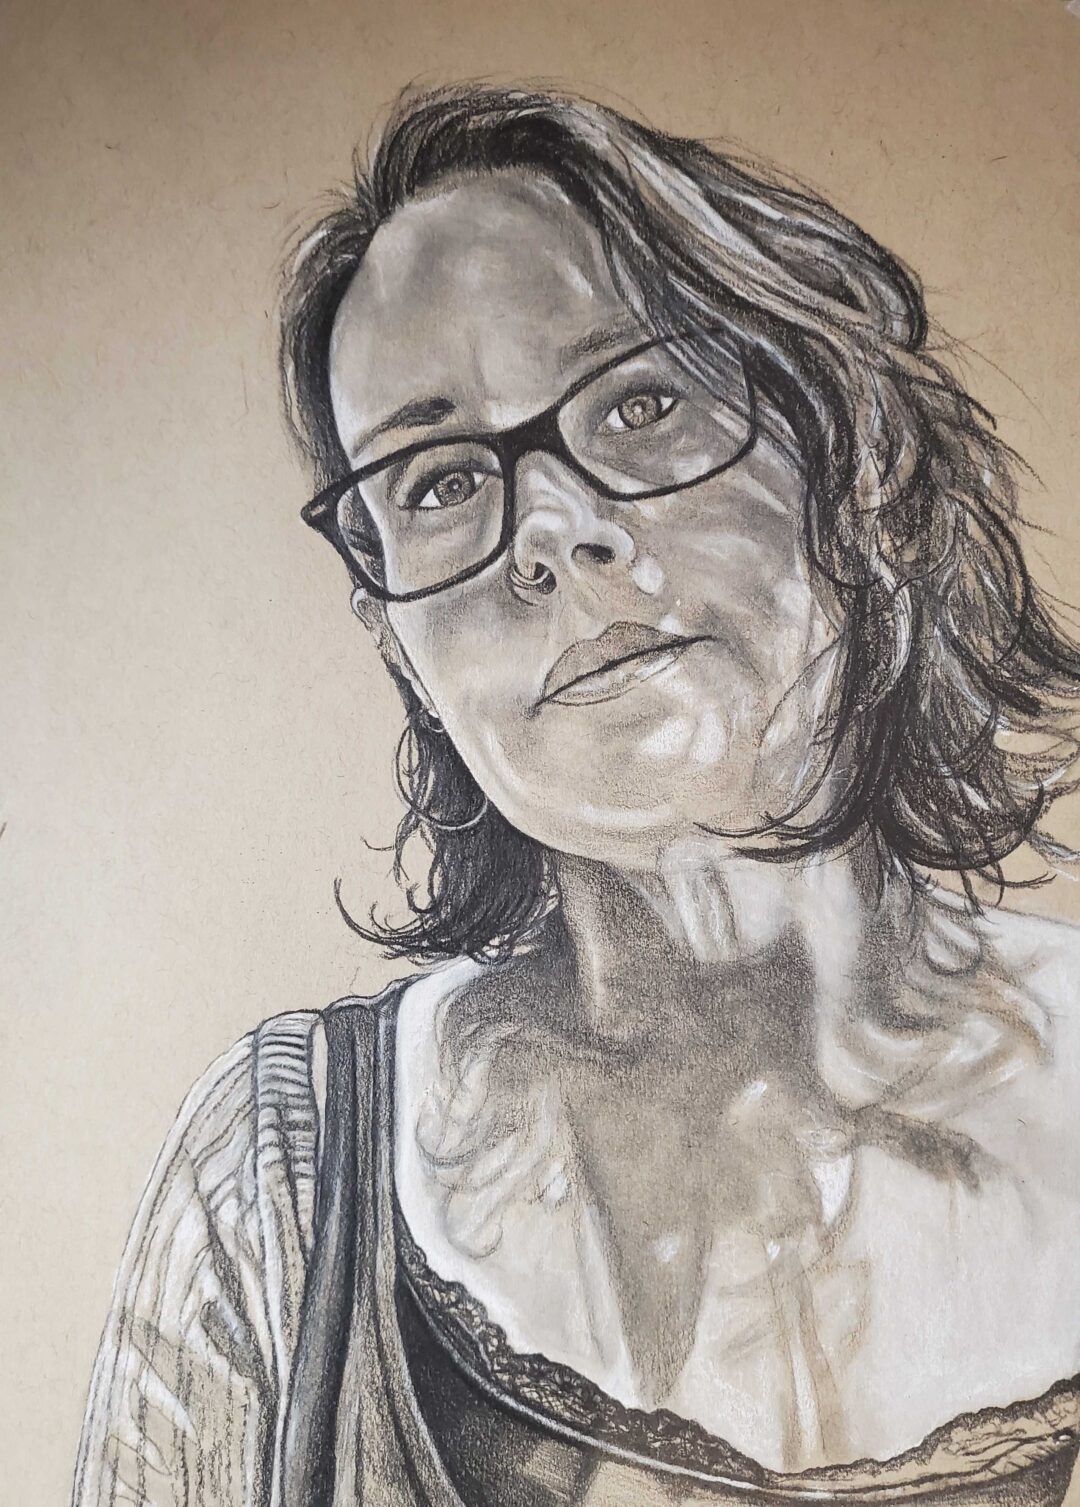 Kristy Brucale Jach “Miss Kristy” pencil and charcoal drawing, 12.5”W x 15.5”H – $250.00